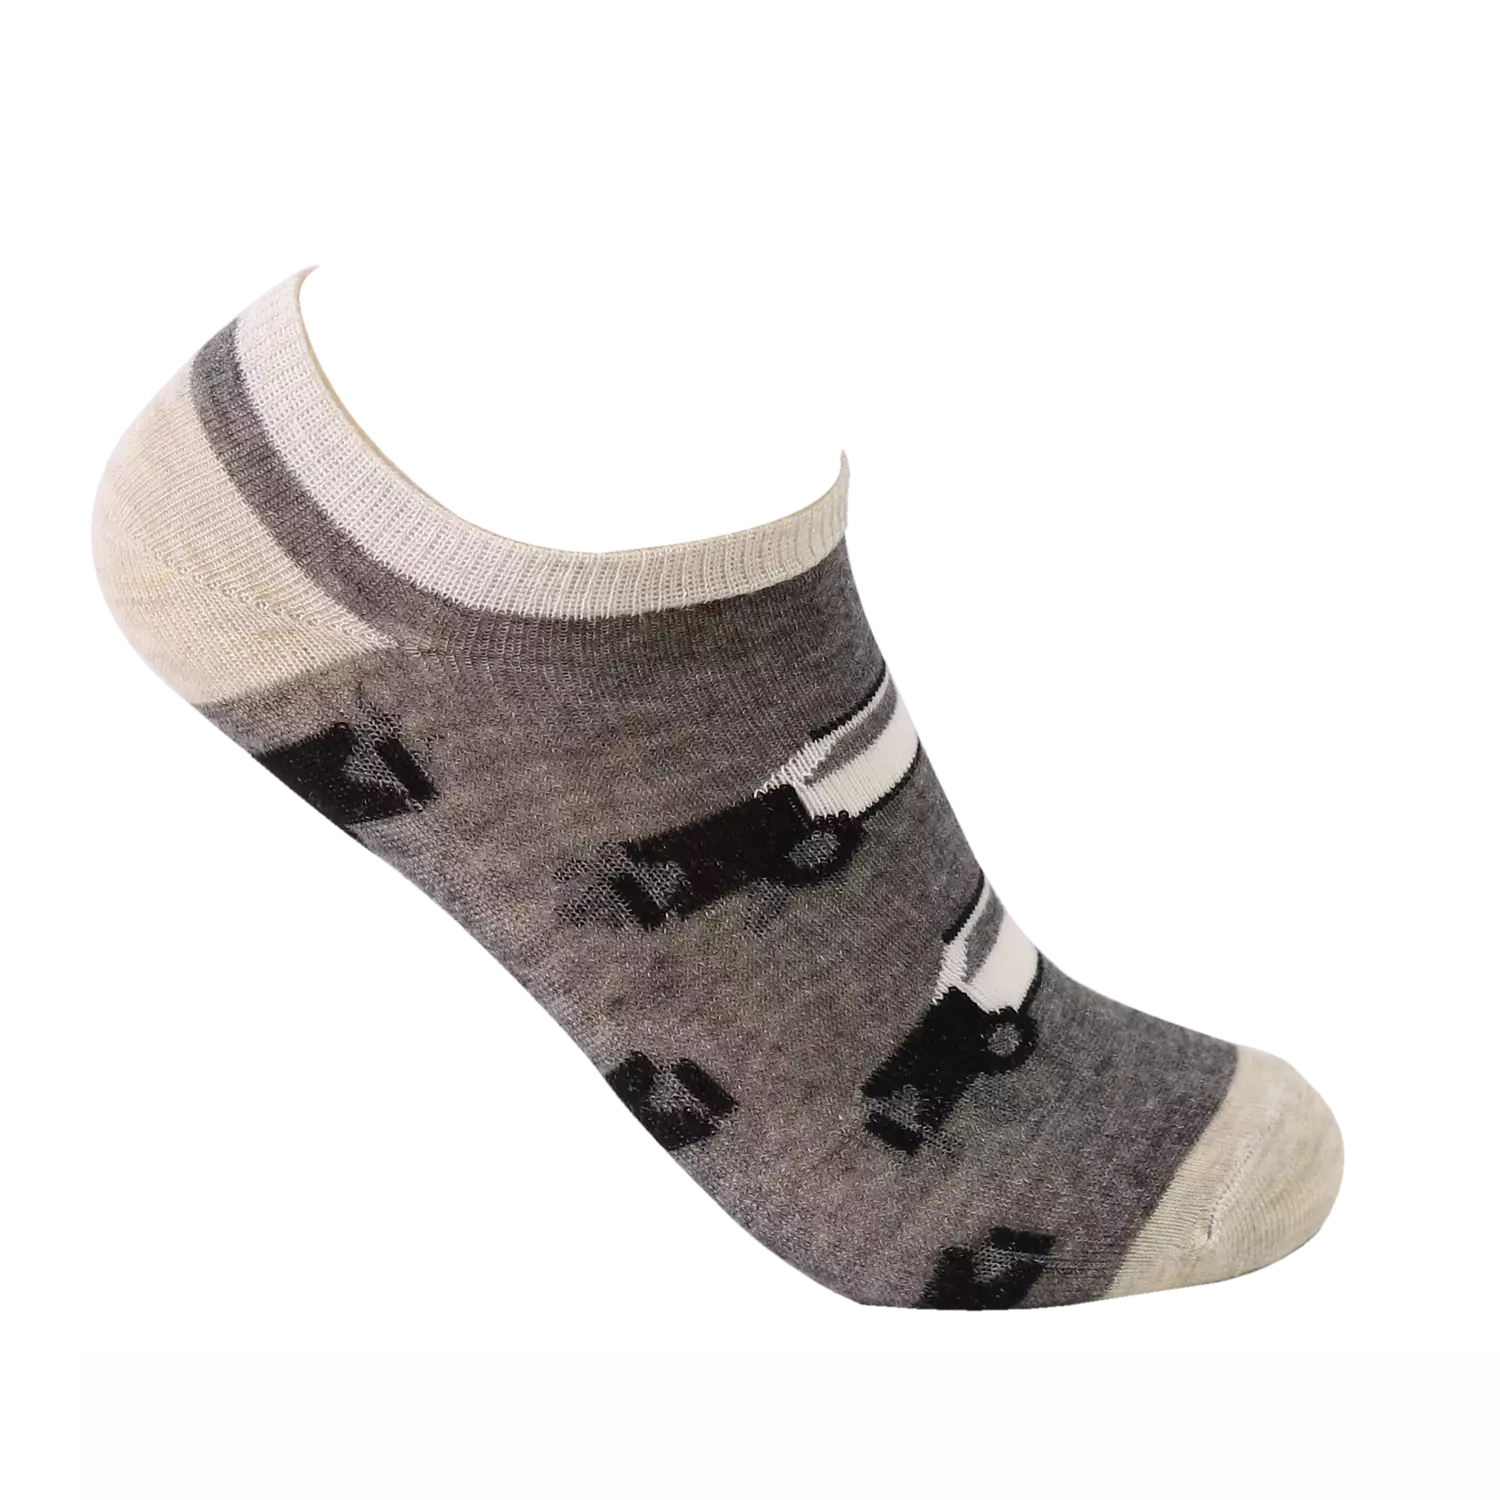 Vouche kids Socks size 6-14 years hover image